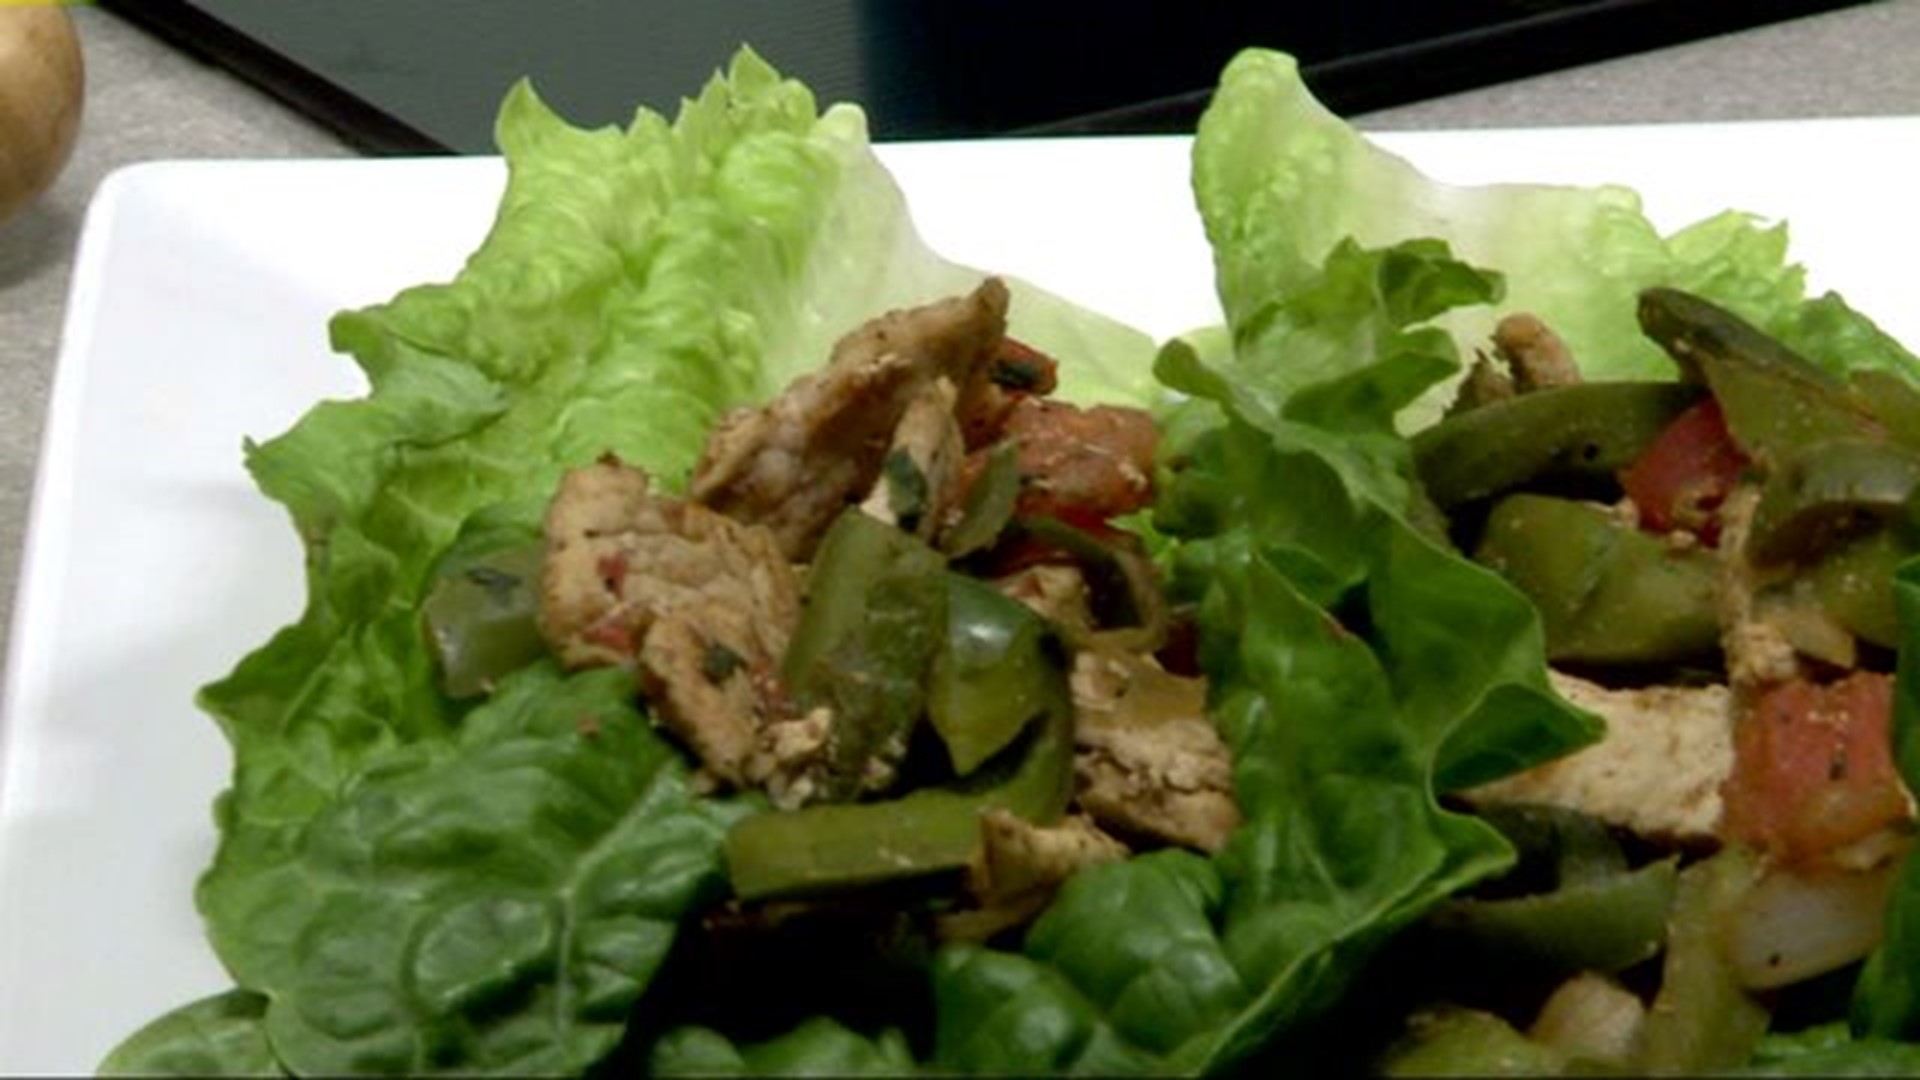 FOX43 Kitchen: Bite into a healthy lifestyle for National Nutrition Month